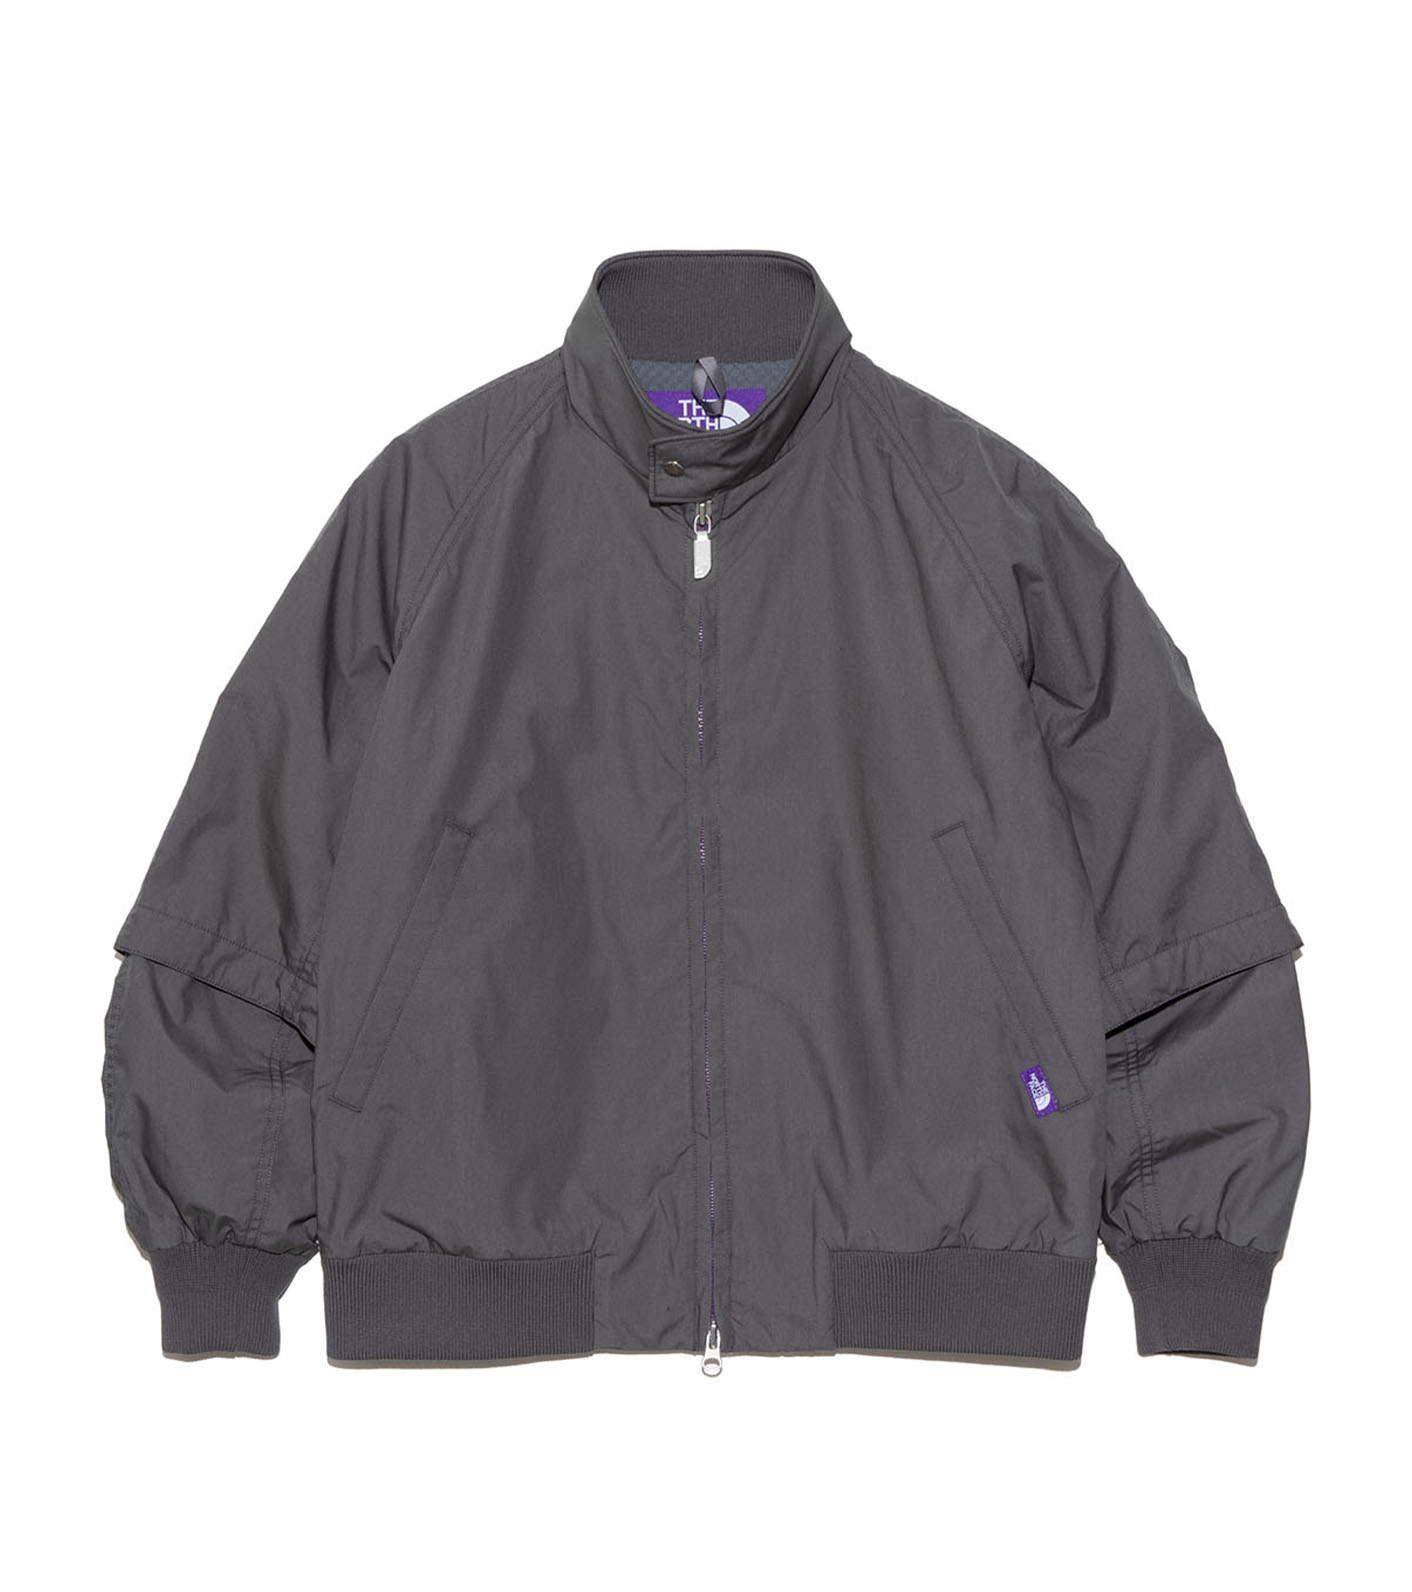 THE NORTH FACE Field Insulation Jacket素材ナイロン